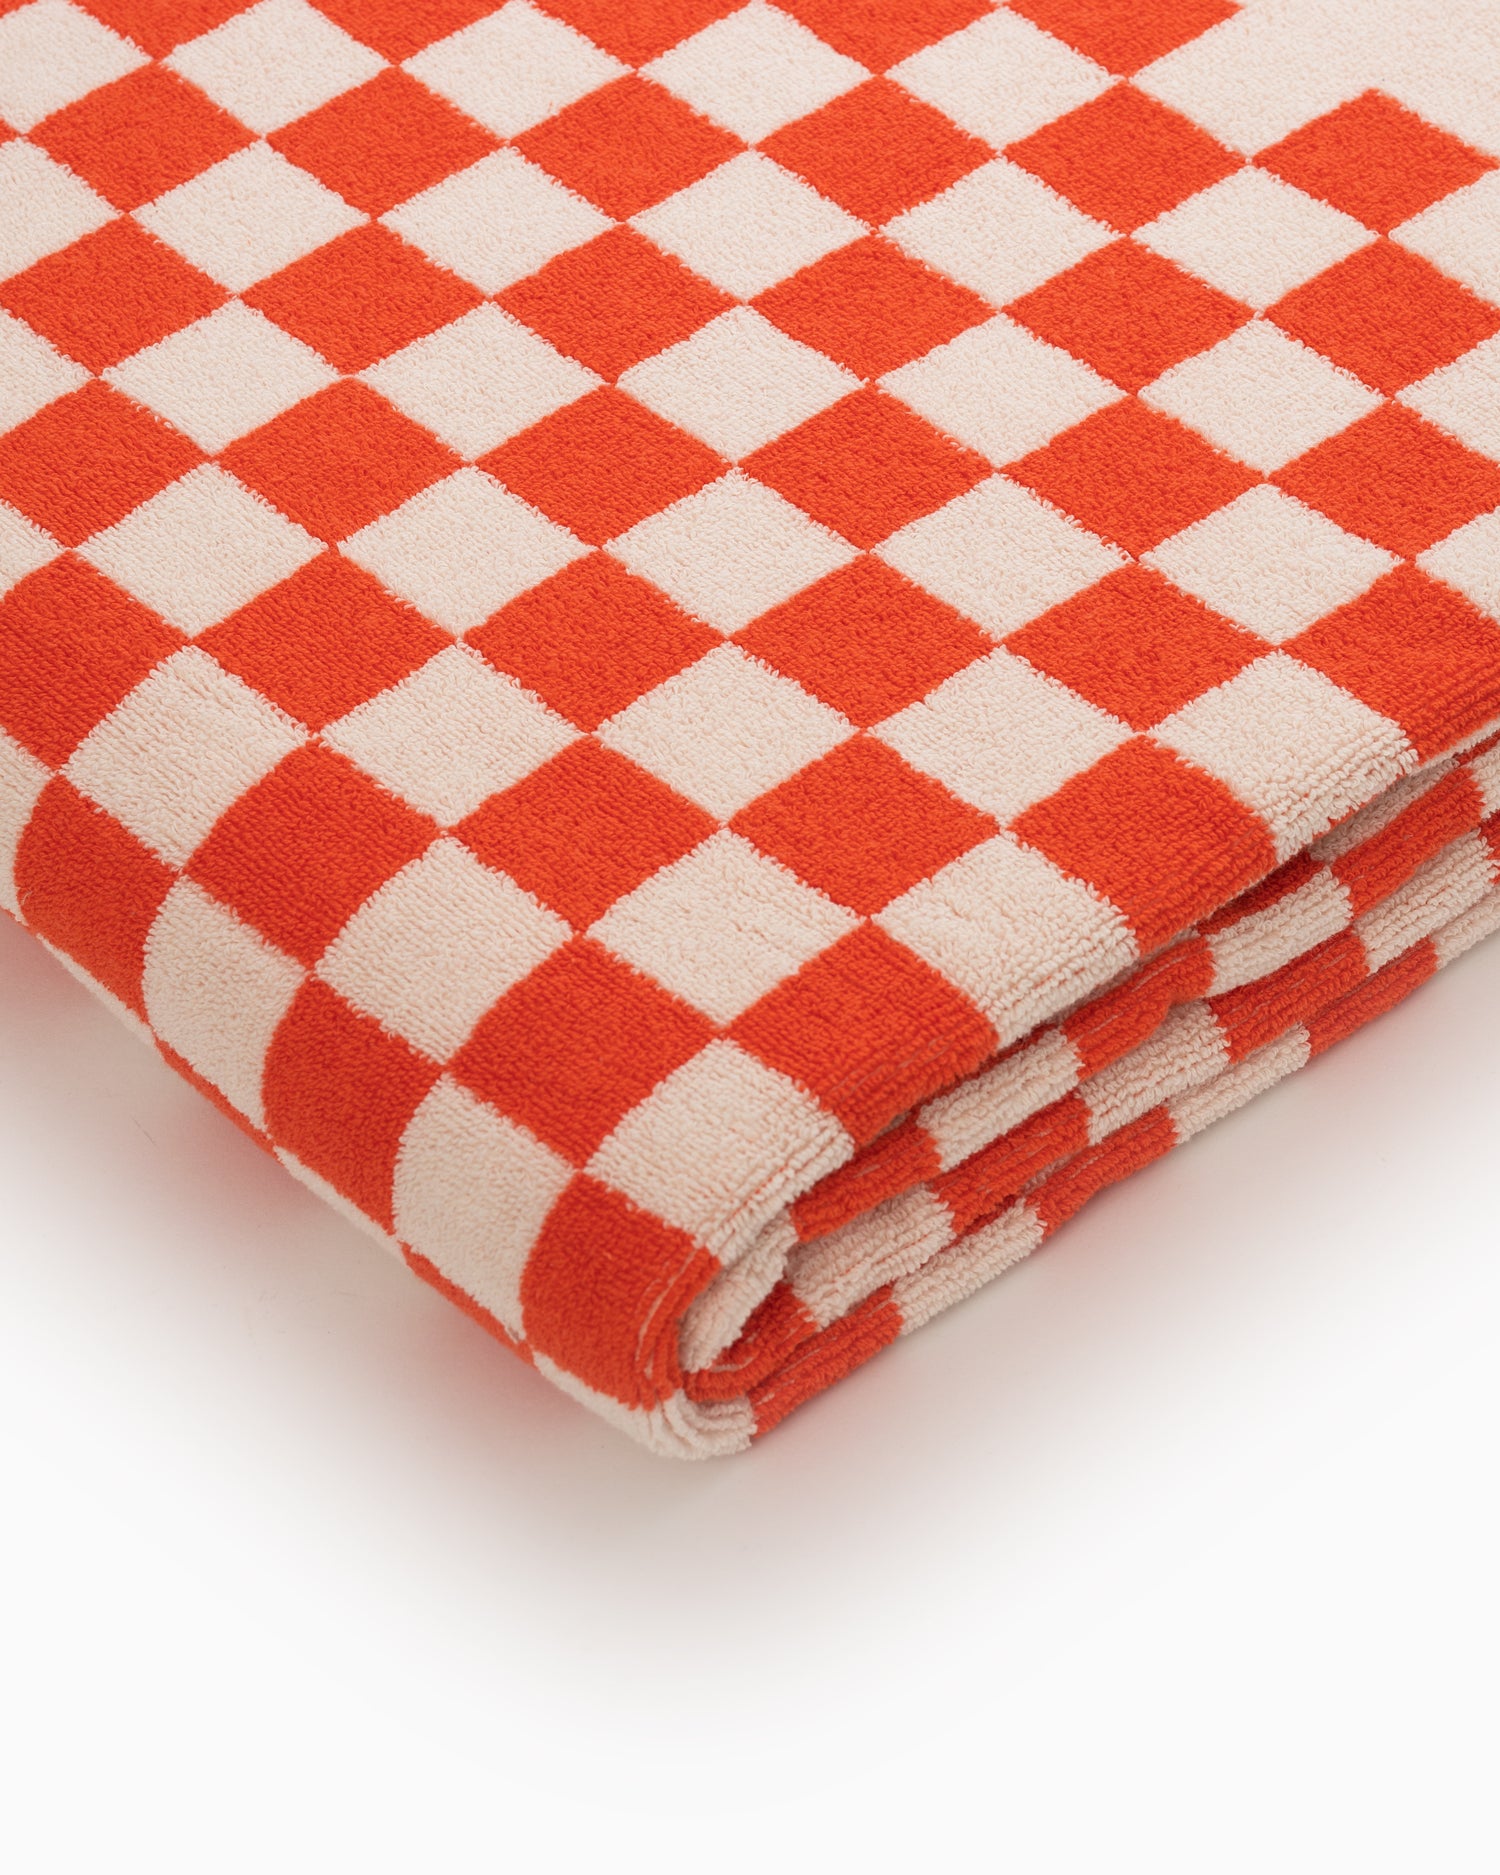 Cream Yellow and Crimson Red Checkerboard Hand & Bath Towel by  ColorfulPatterns